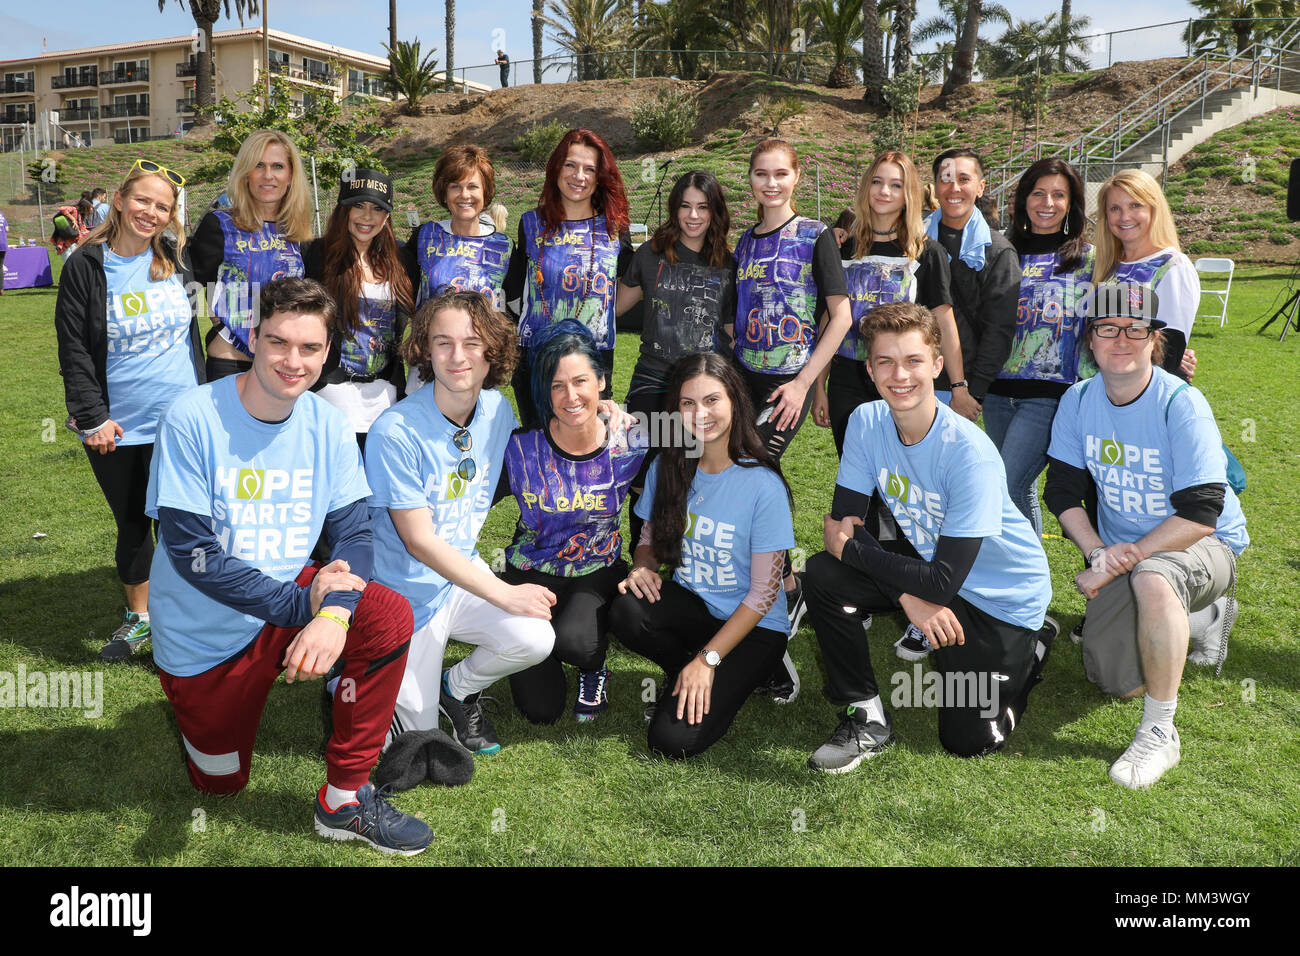 The National Eating Disorders Association (NEDA) Walk was held in Los  Angeles at Crescent Bay Point Park in Santa Monica, California. NEDA is the  largest nonprofit organization dedicated to supporting individuals and